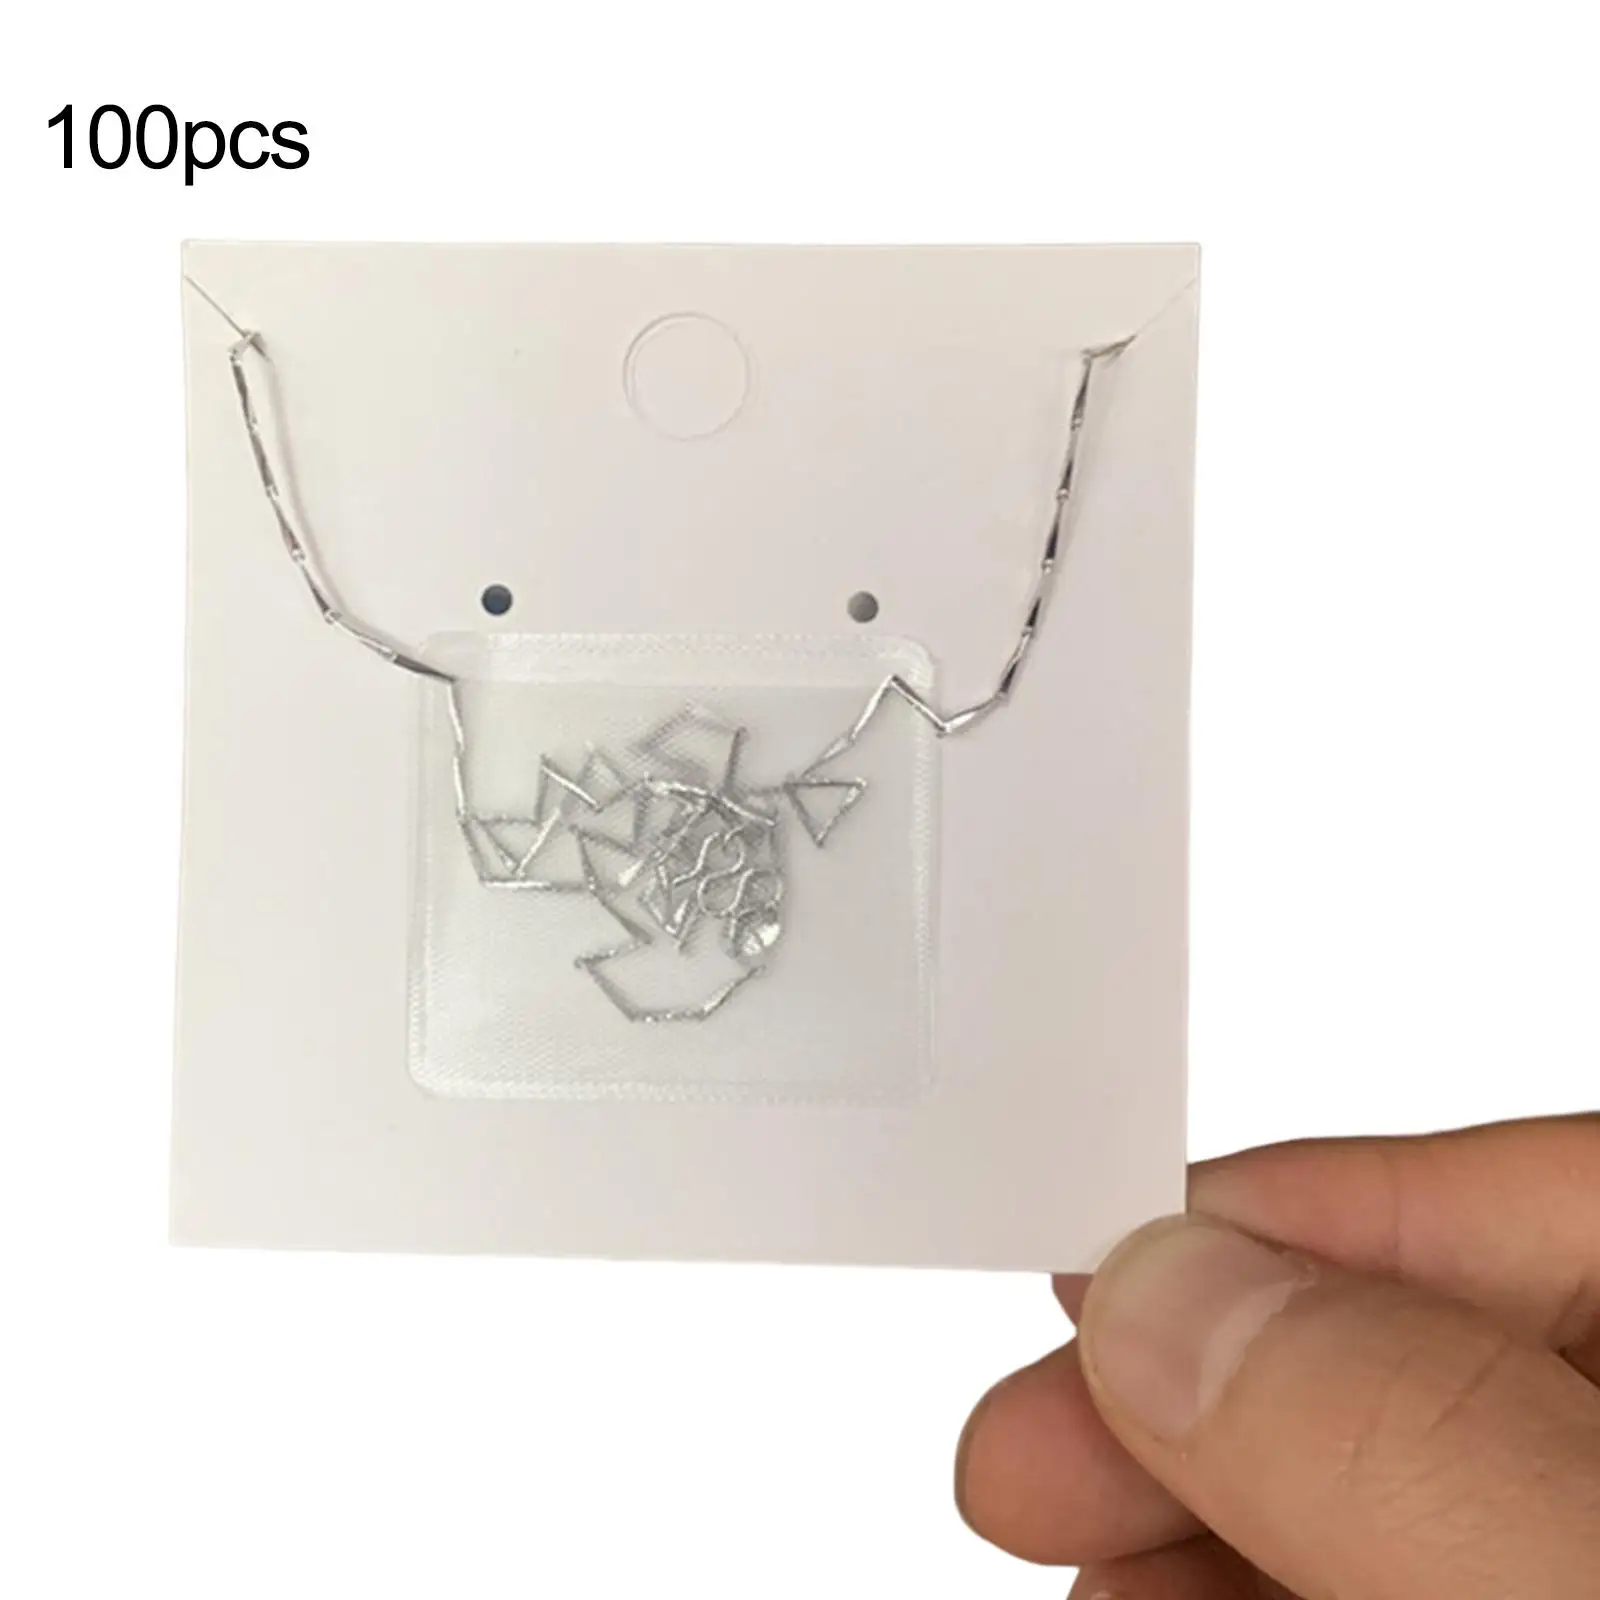 100Pcs Jewelry Bags Transparent Portable PE Jewelry Holder Jewelry Organizer Packing Pouch for Ear Studs Rings Necklace Earrings